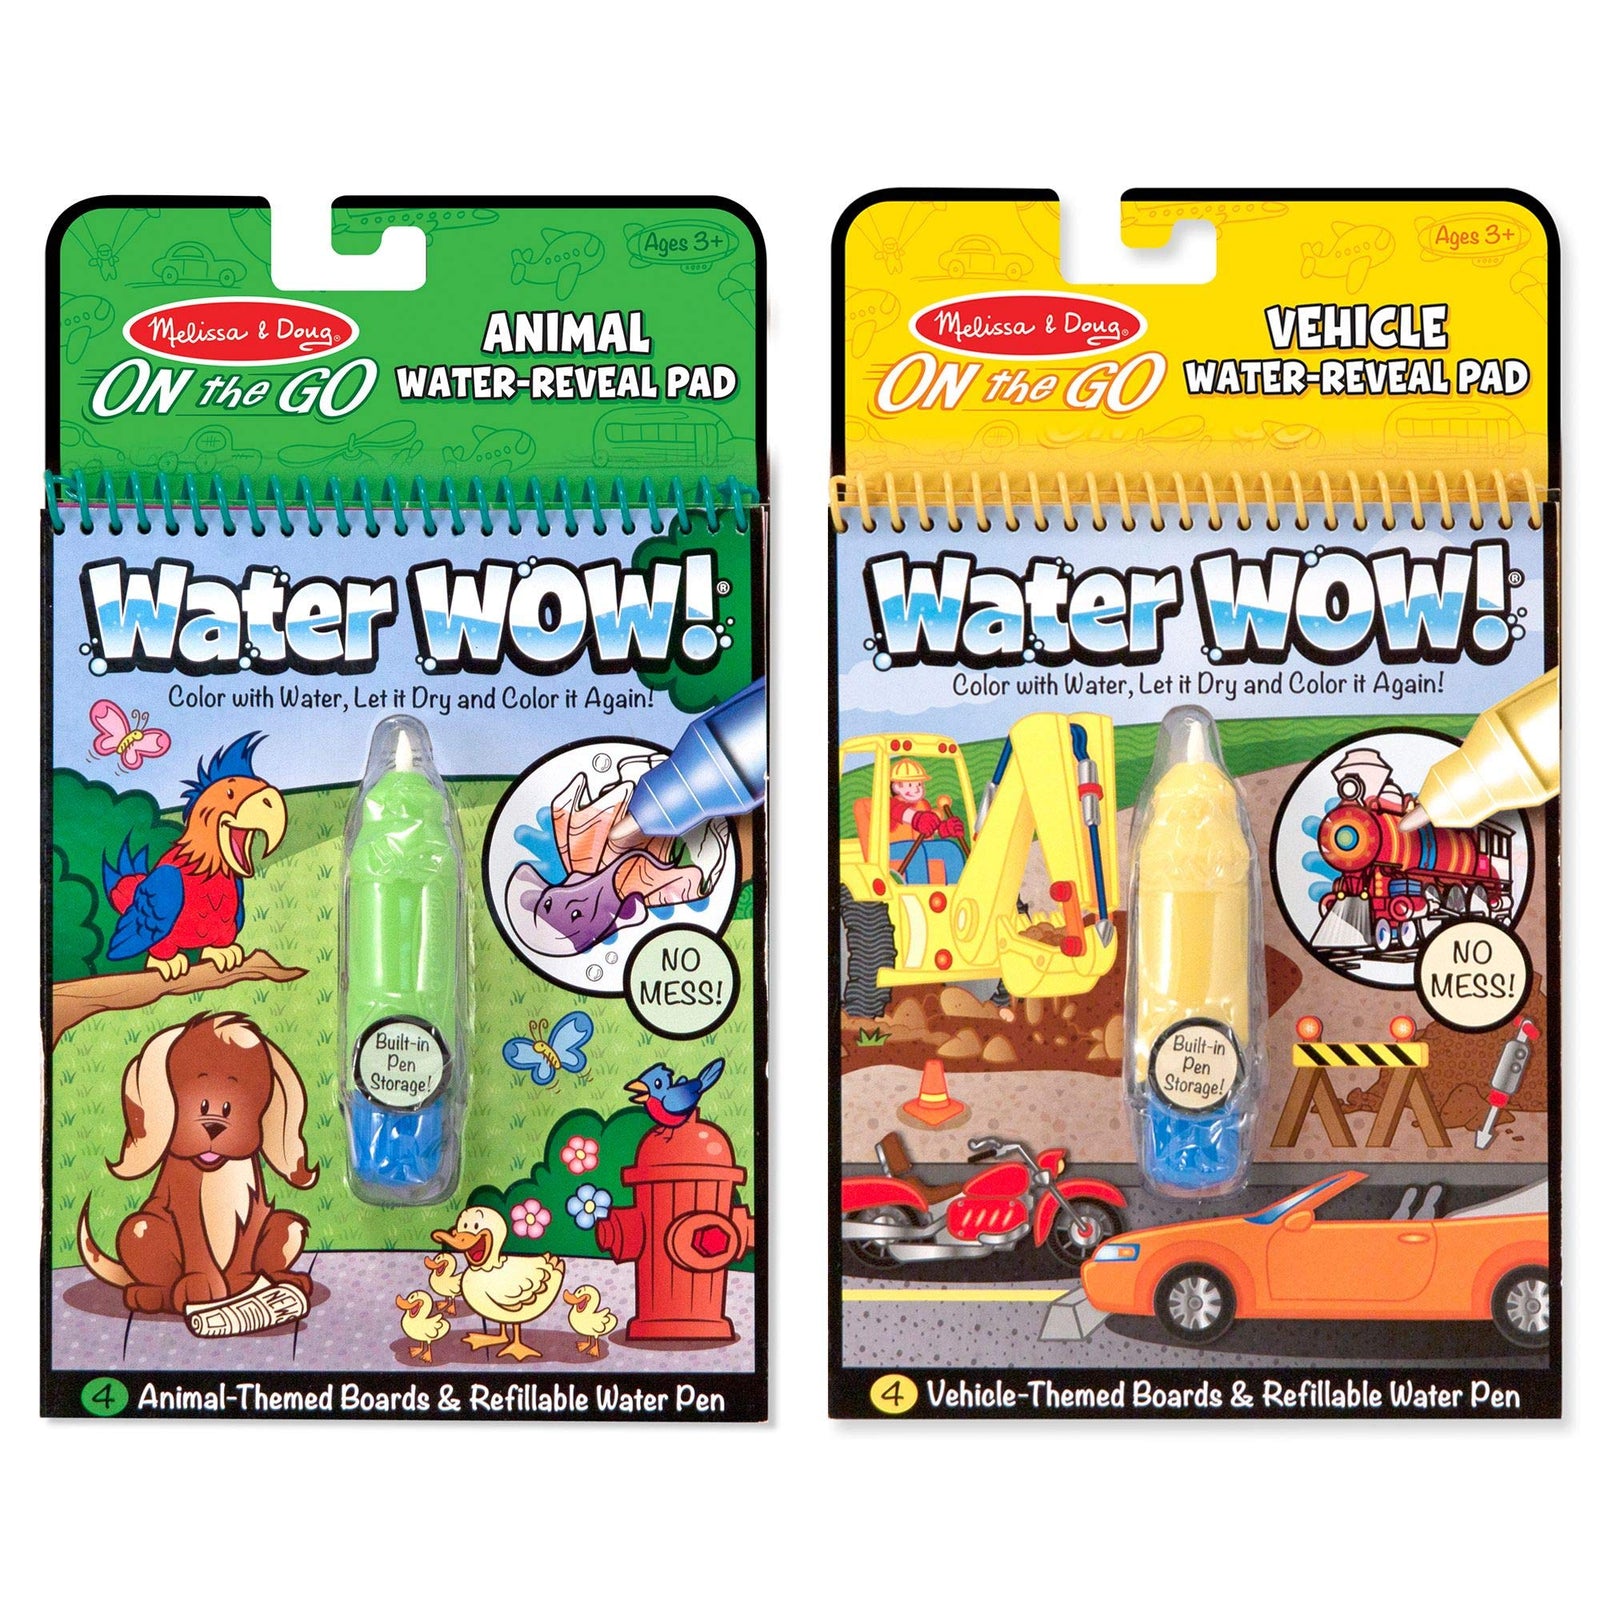 Melissa & Doug On the Go Water Wow! Reusable Water-Reveal Activity Pads, 2-pk, Vehicles, Animals